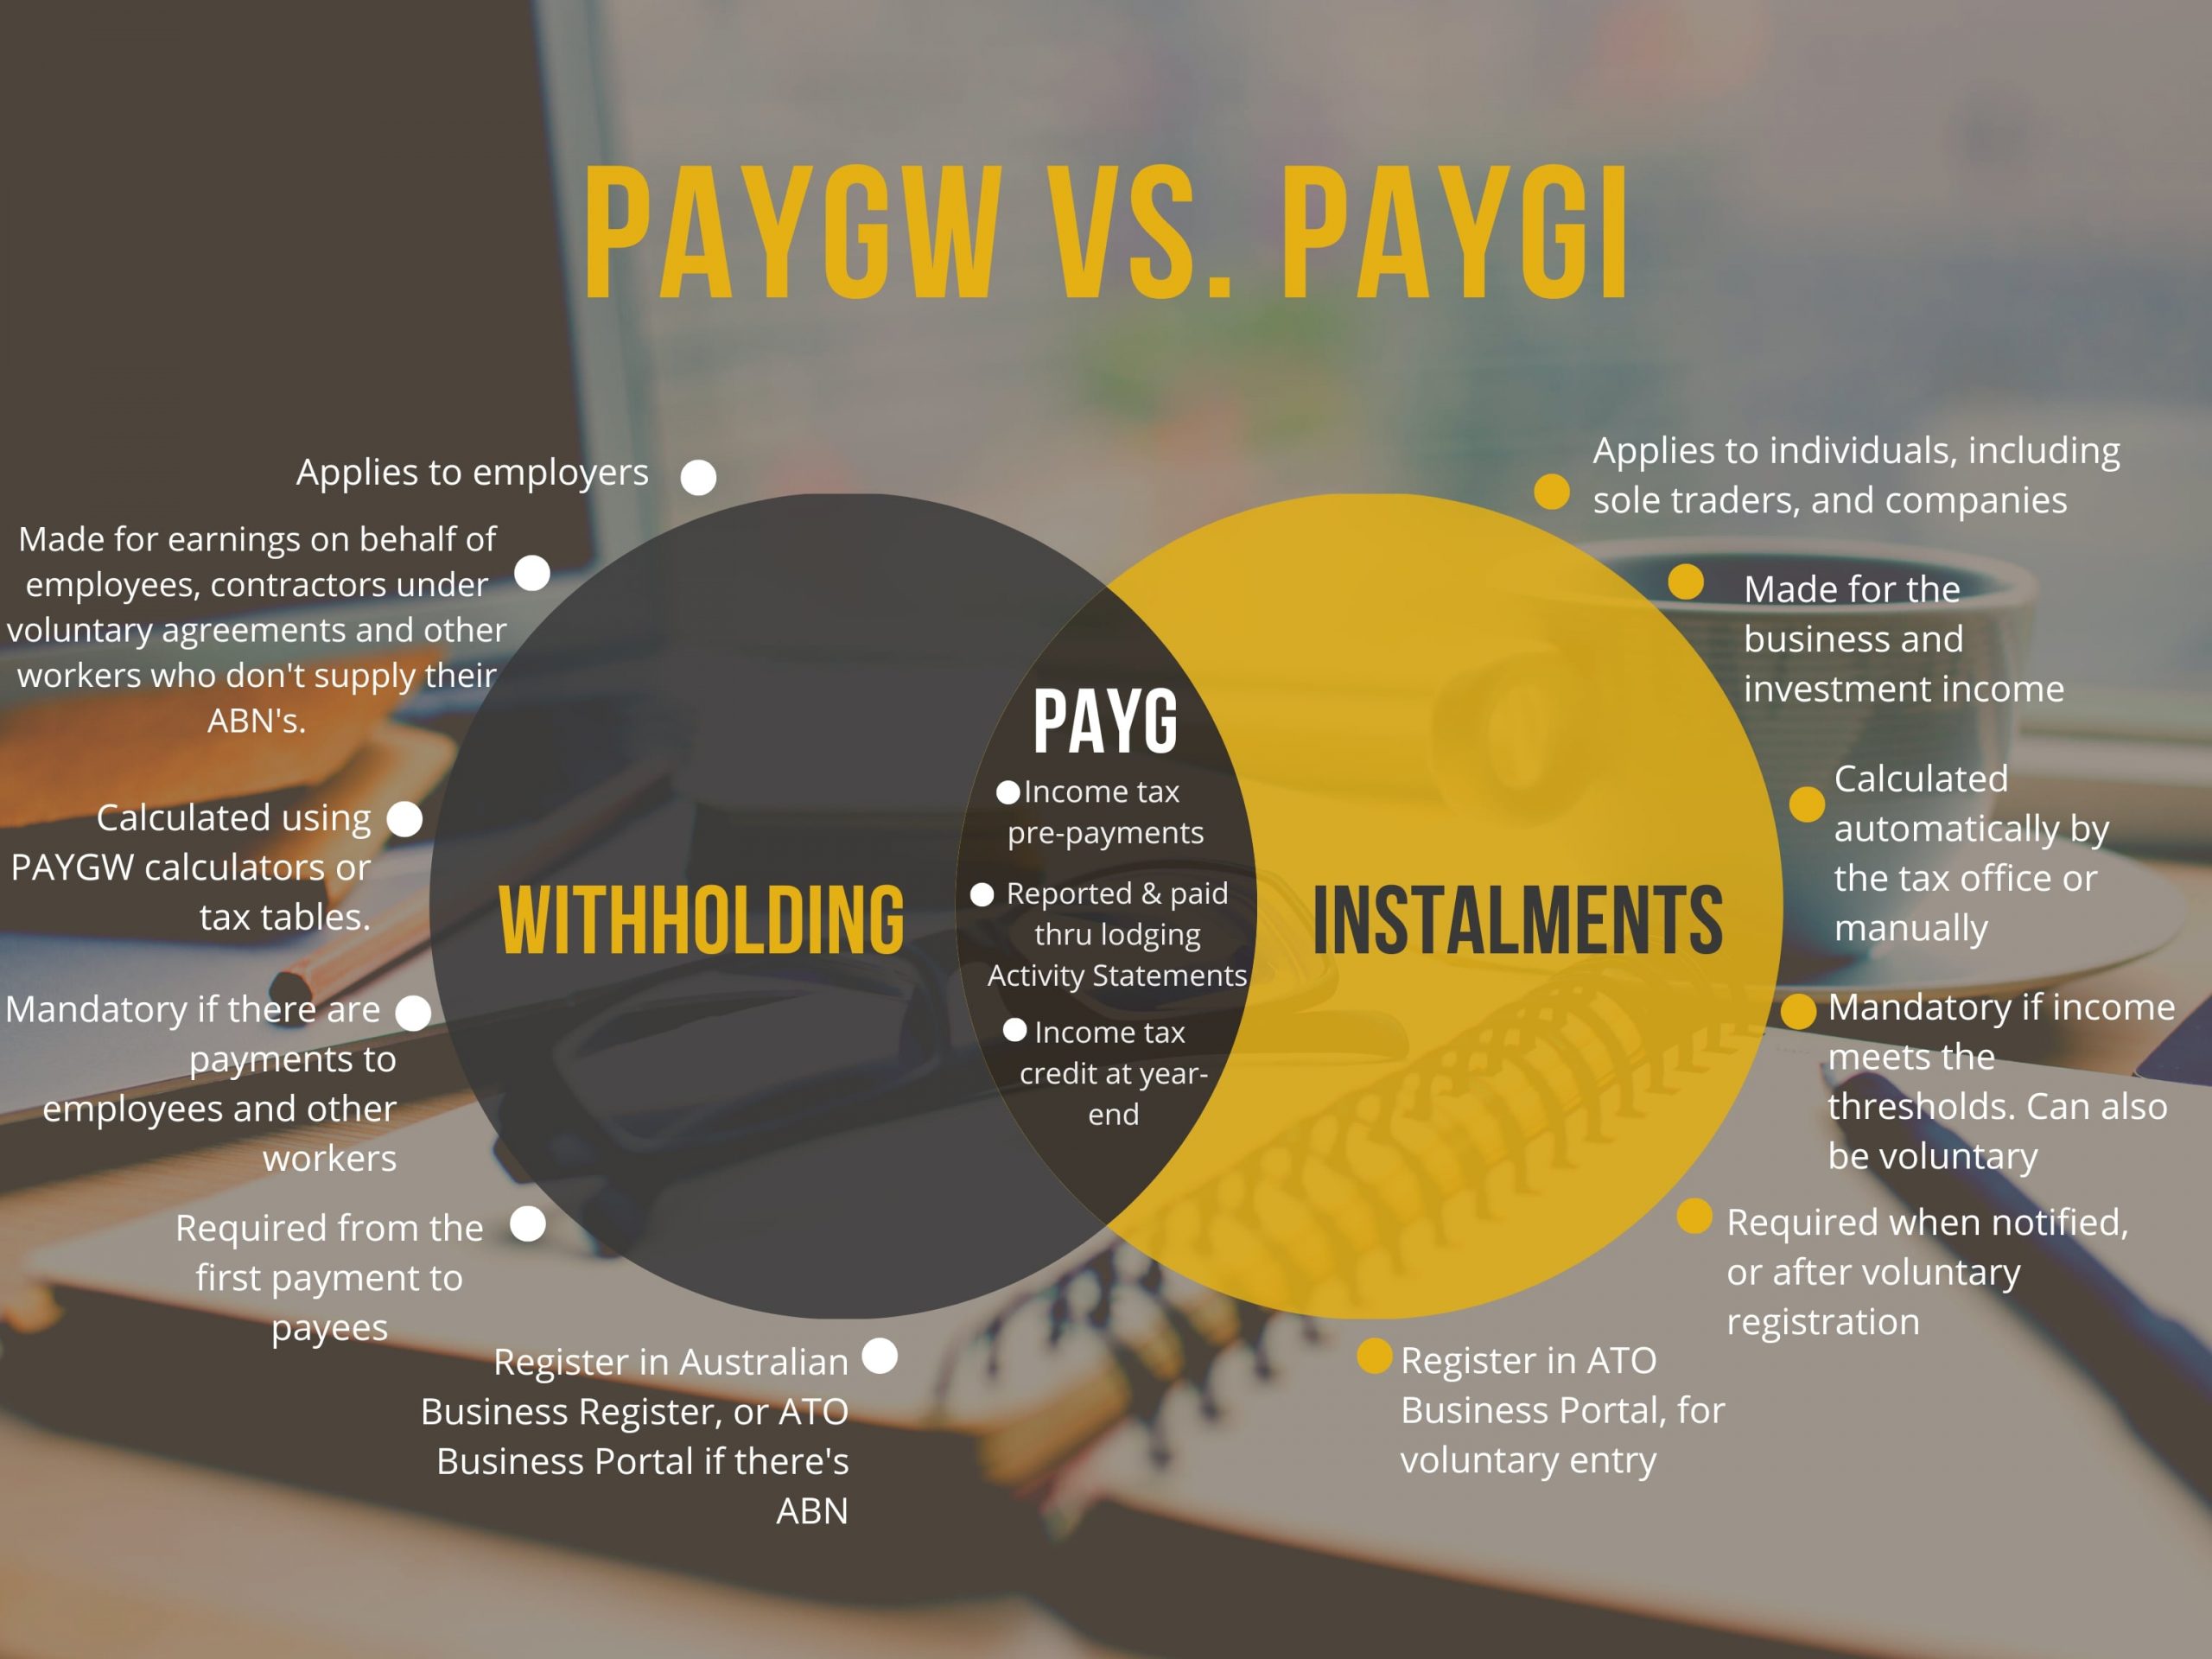 What is PAYG and the difference between PAYGW and PAYGI